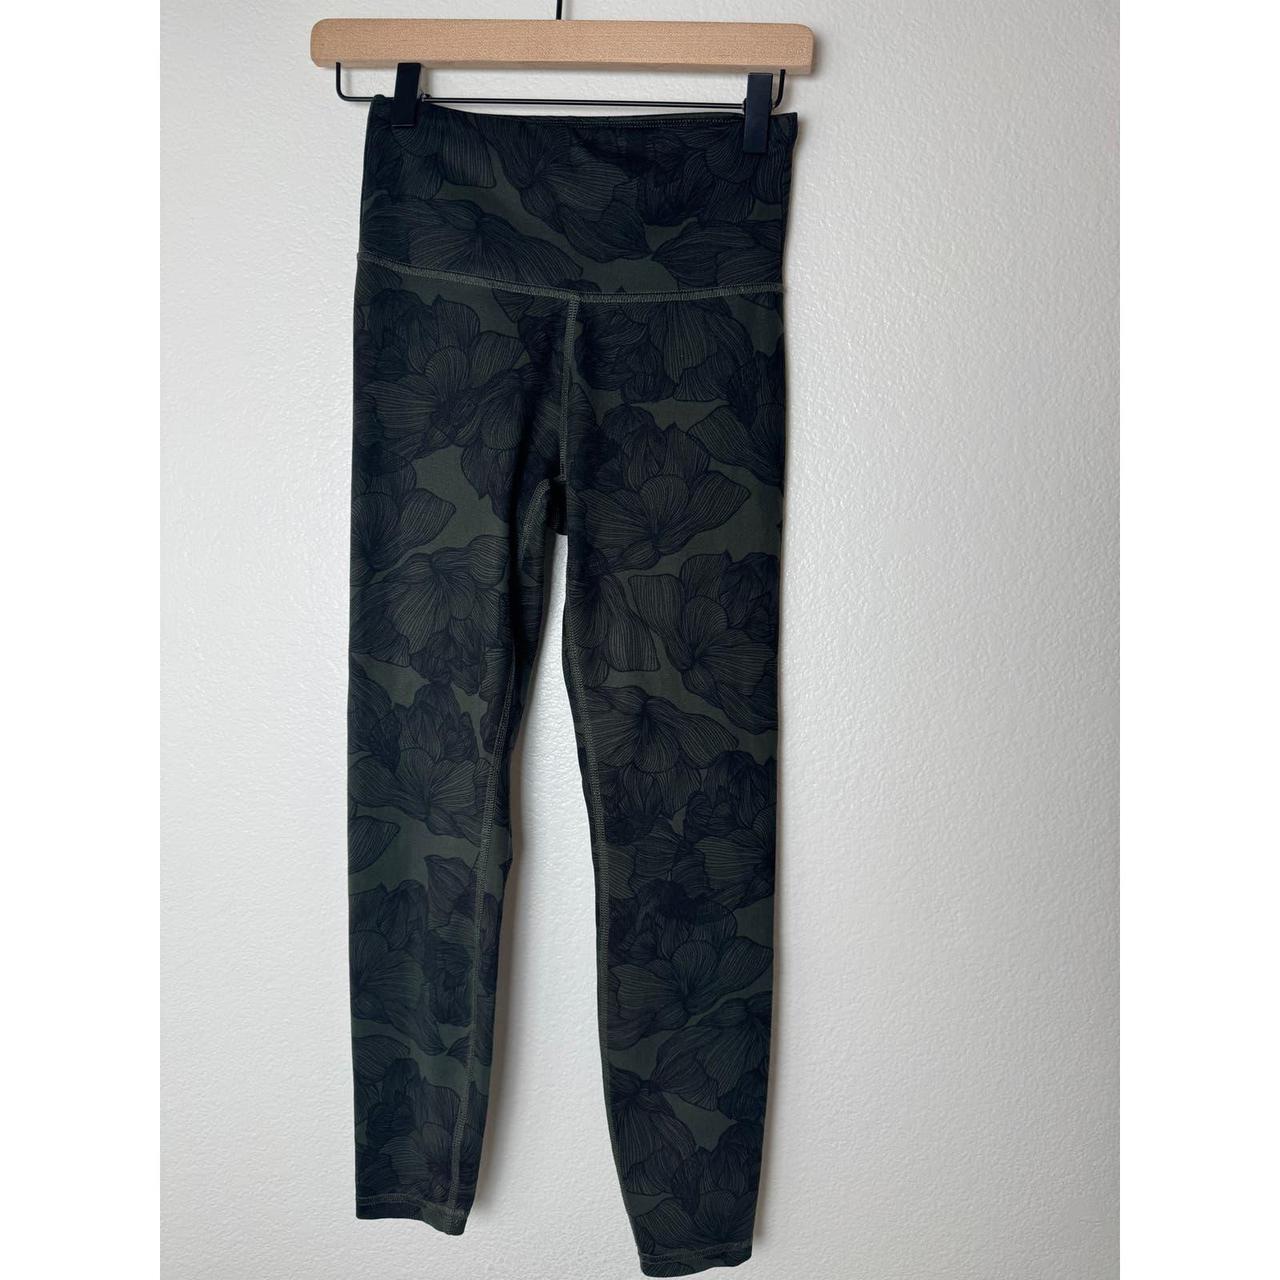 Balance collection Green yoga pants with white - Depop